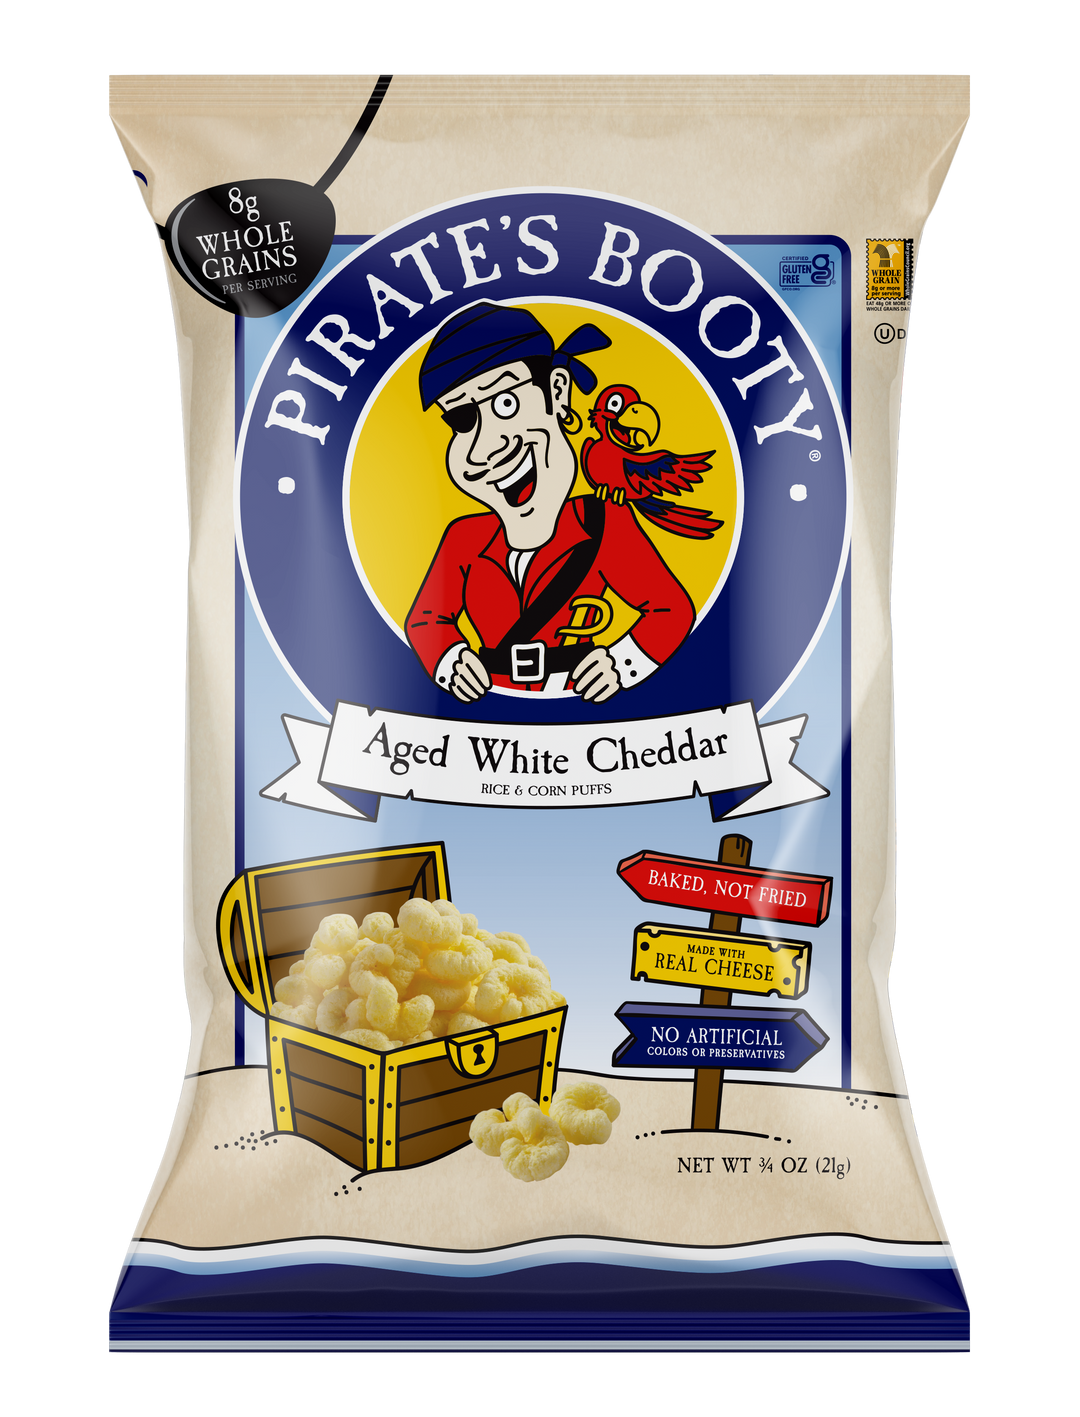 Pirate's Booty Aged White Cheddar K-12-0.75 oz.-72/Case